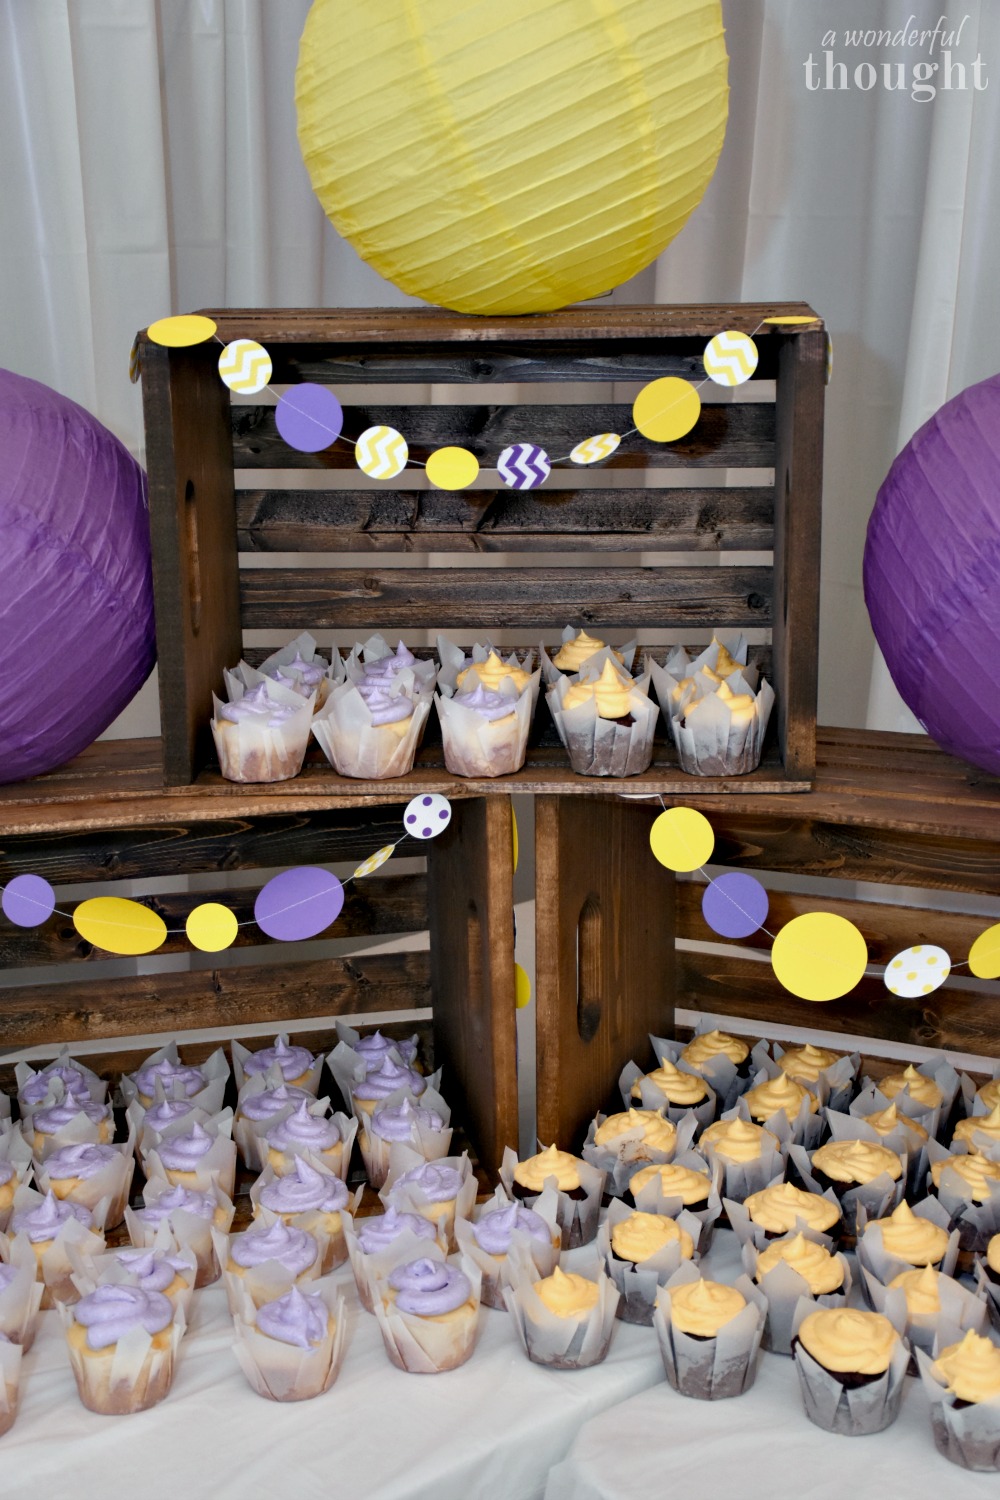 Graduation Party Ideas | Garage Party #graduationparty #graduationdecor #graduationfood #partyideas #partydecor #awonderfulthought #cupcakedisplay